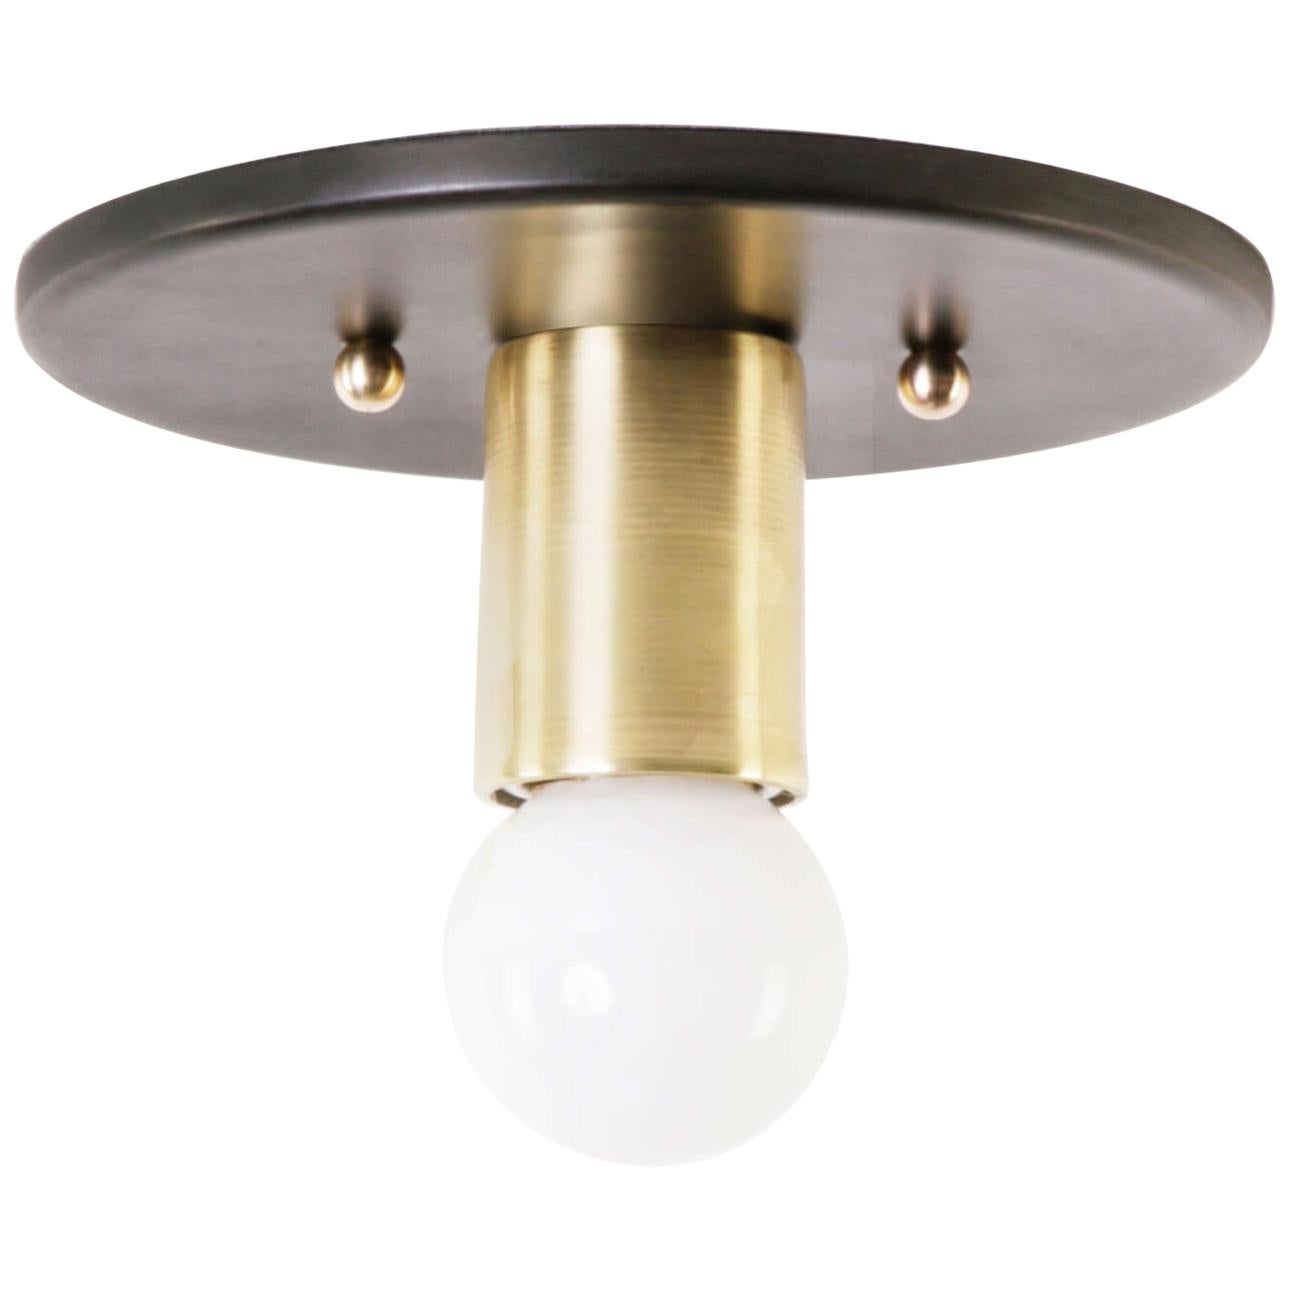 Louis Flush Mount with Steel Canopy and Solid Brass Extension